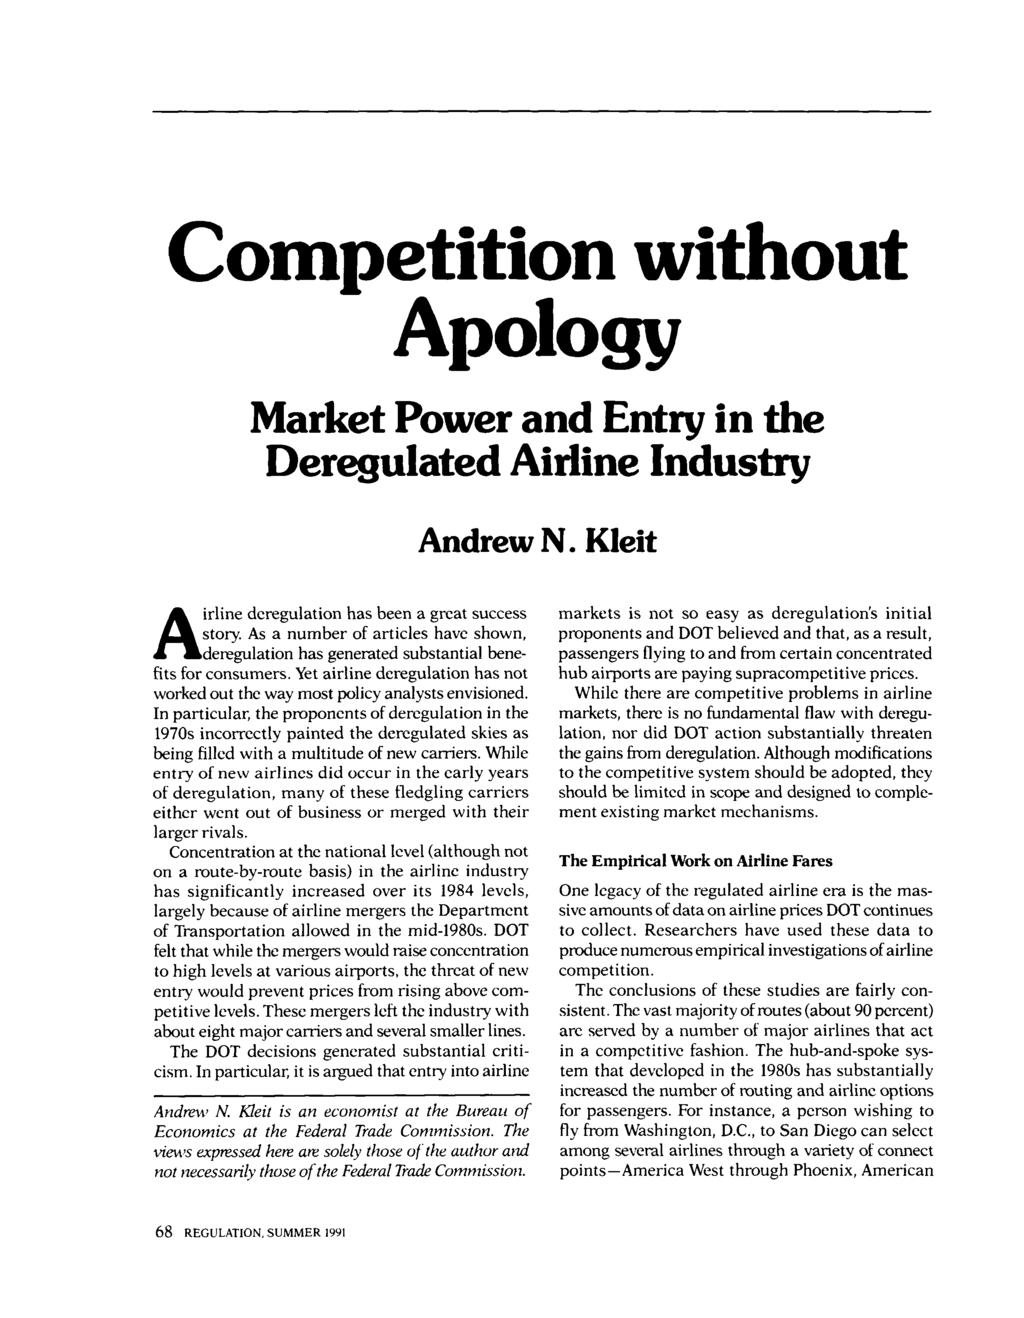 Competition without Apology Market Power and Entry in the Deregulated Airline Industry Andrew N. Kleit deregulation has been a great success story.